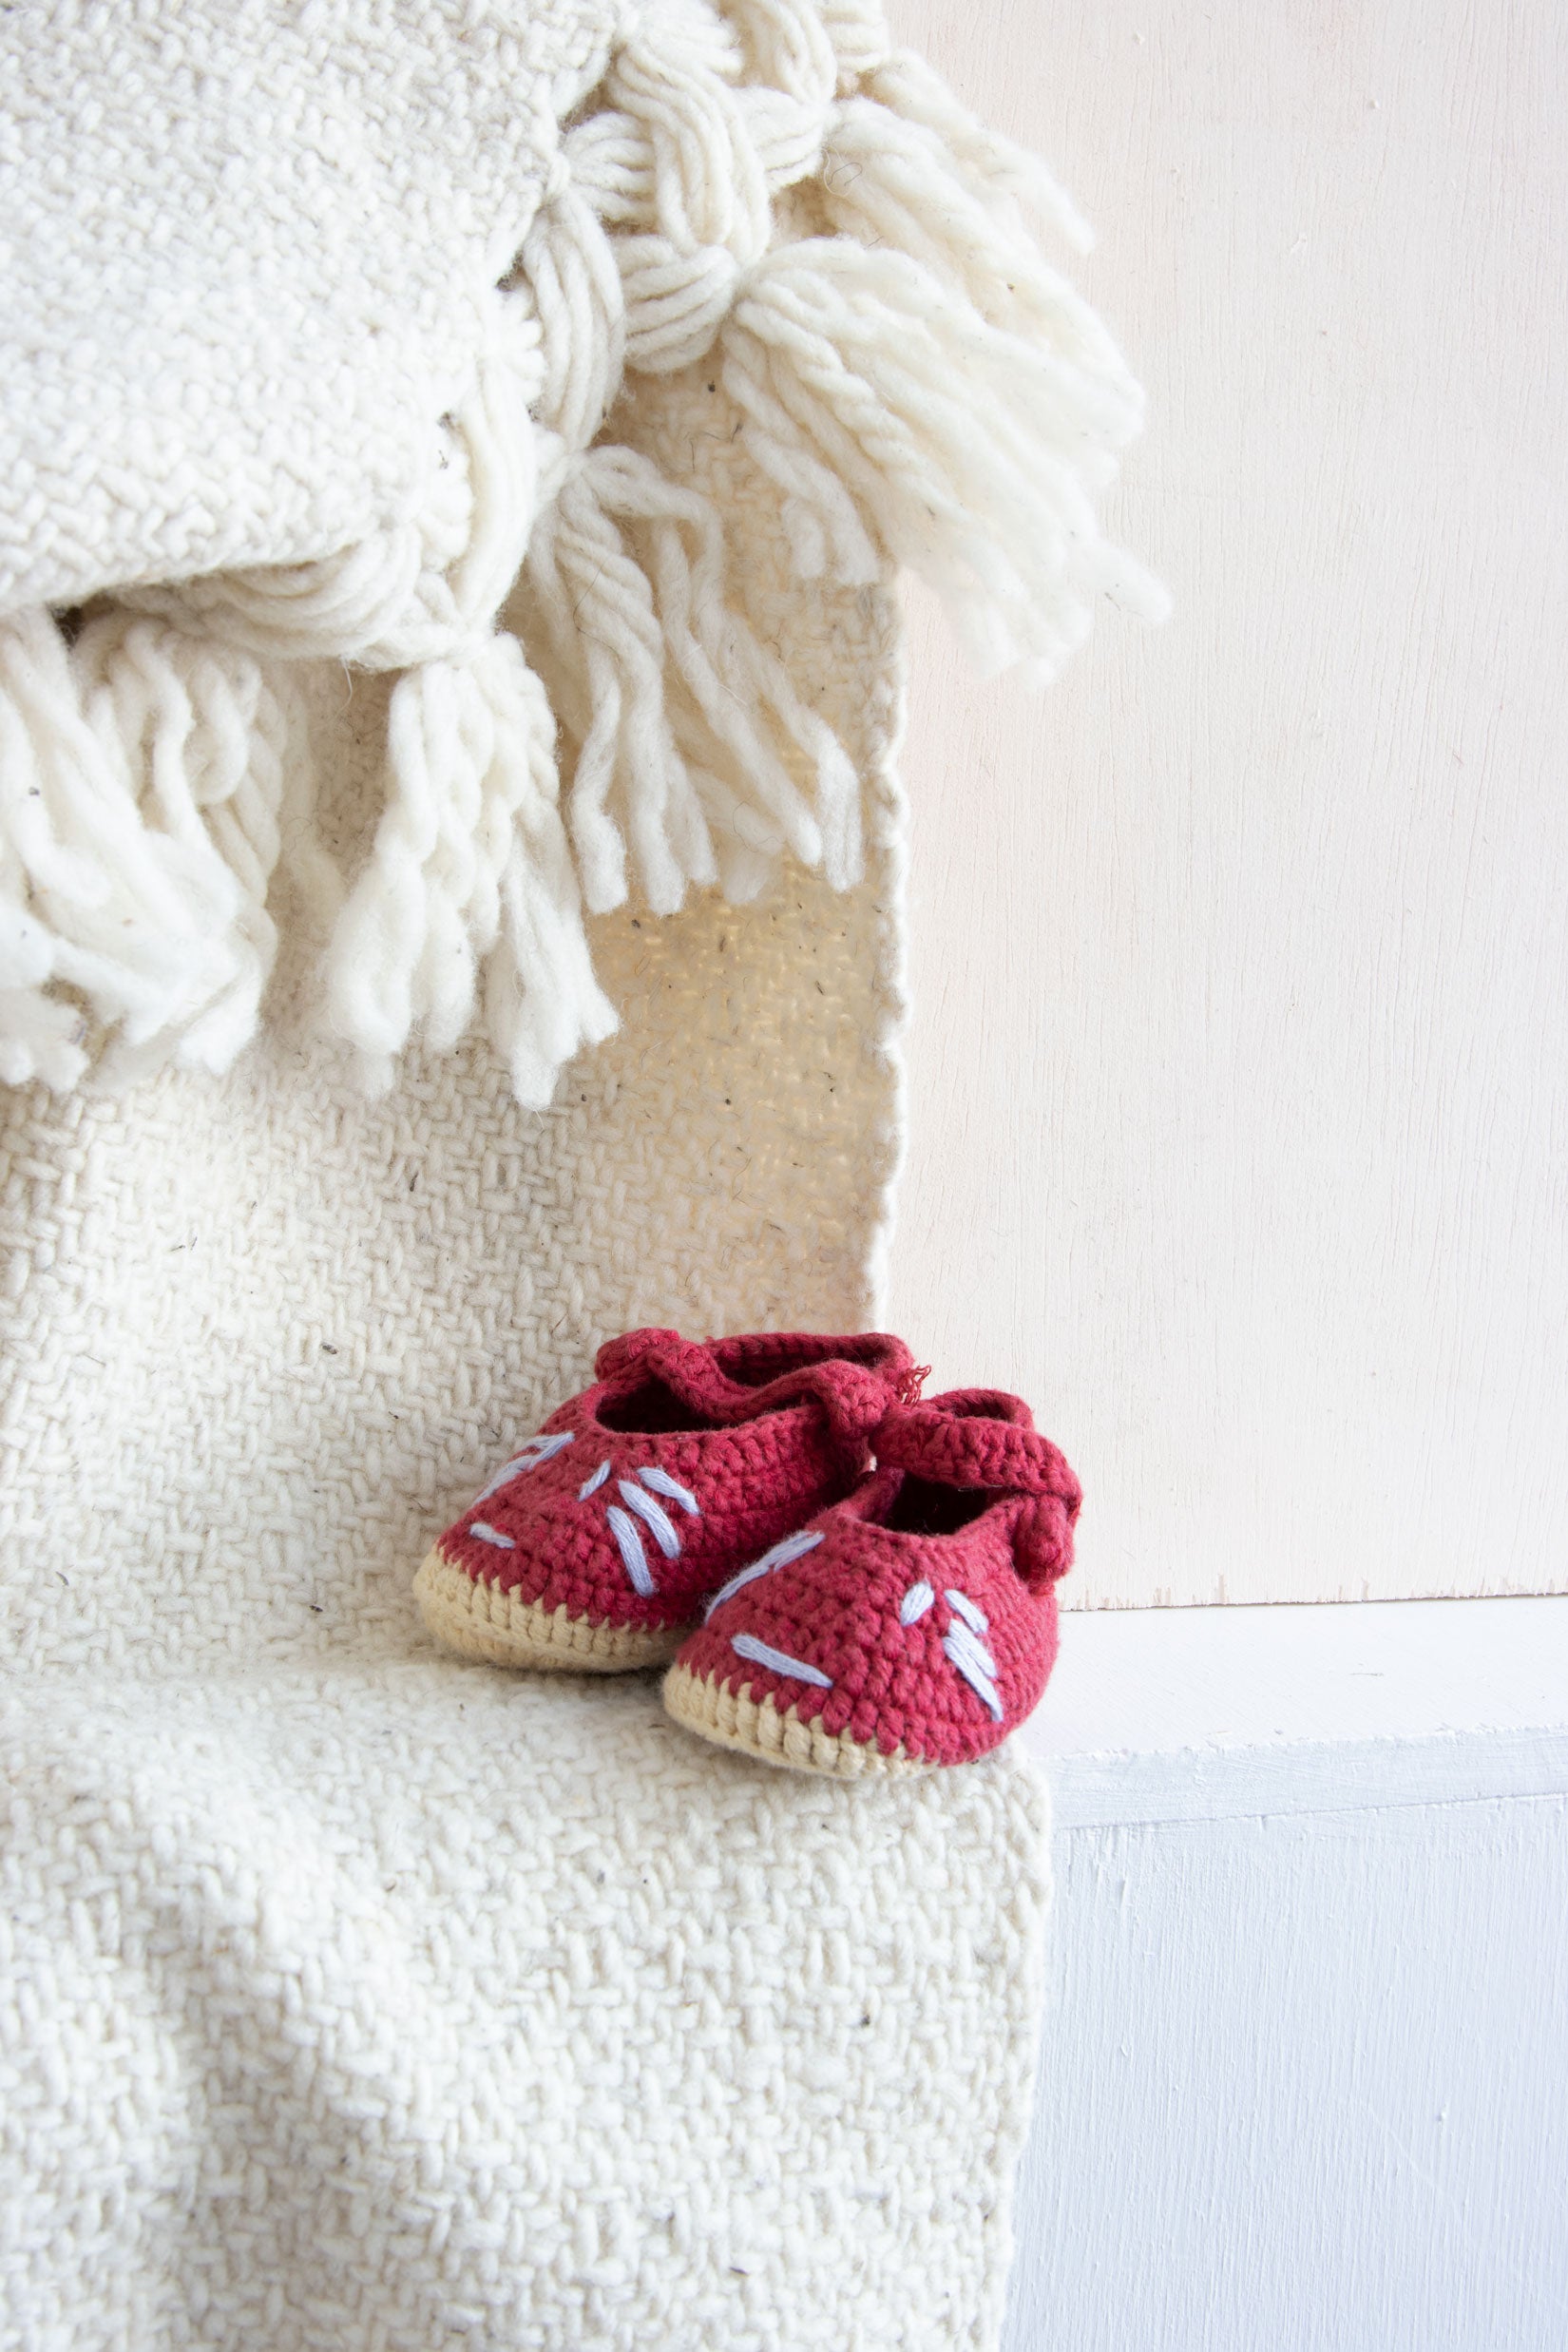 Knit Baby Slippers (3 - 6 months) - 7 Styles